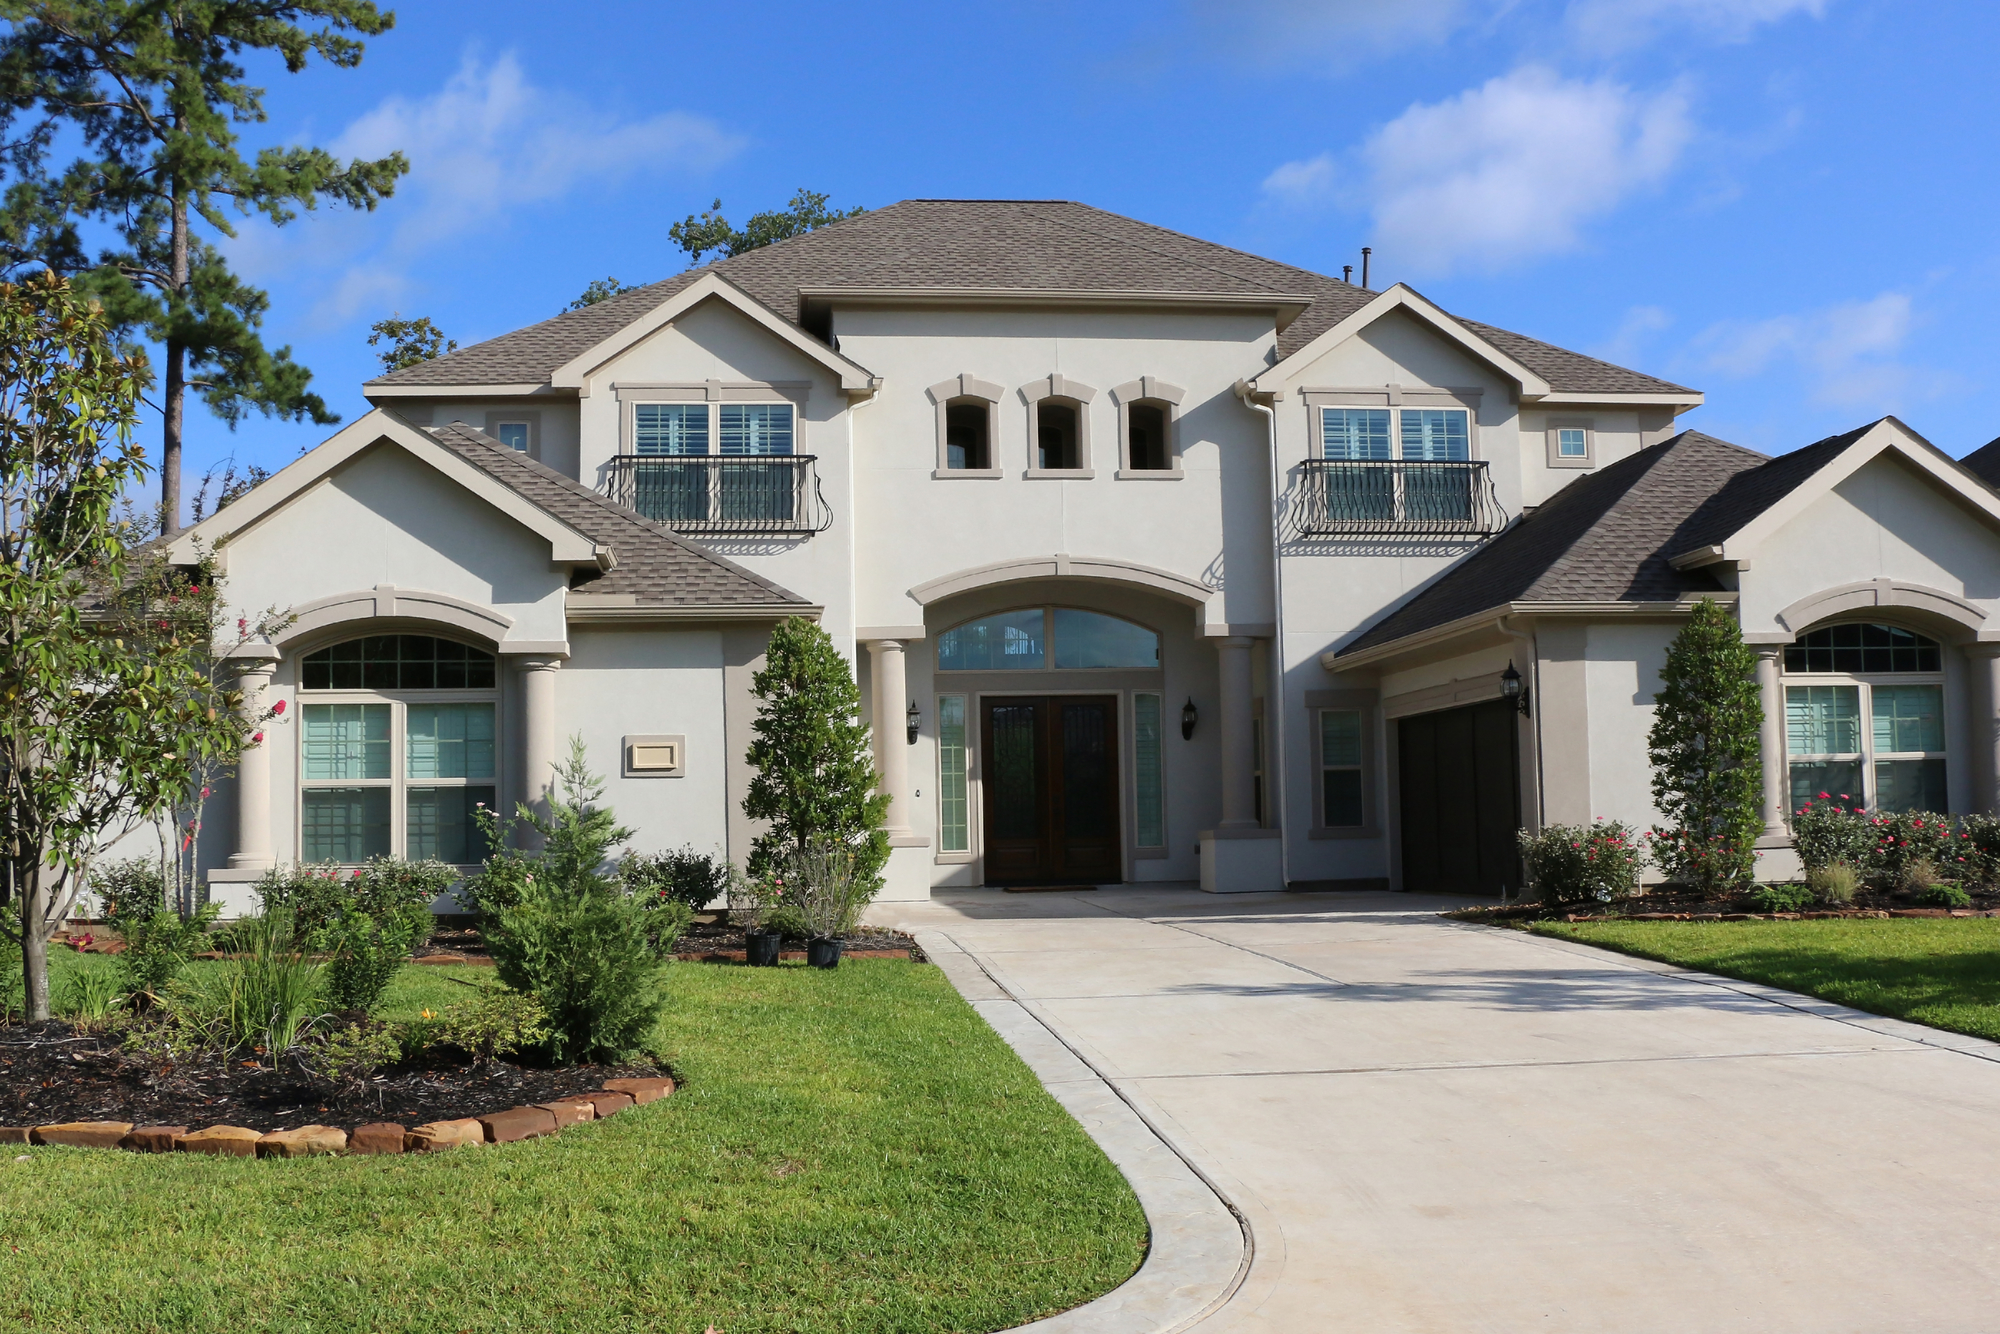 Problems Stucco Homeowners Face